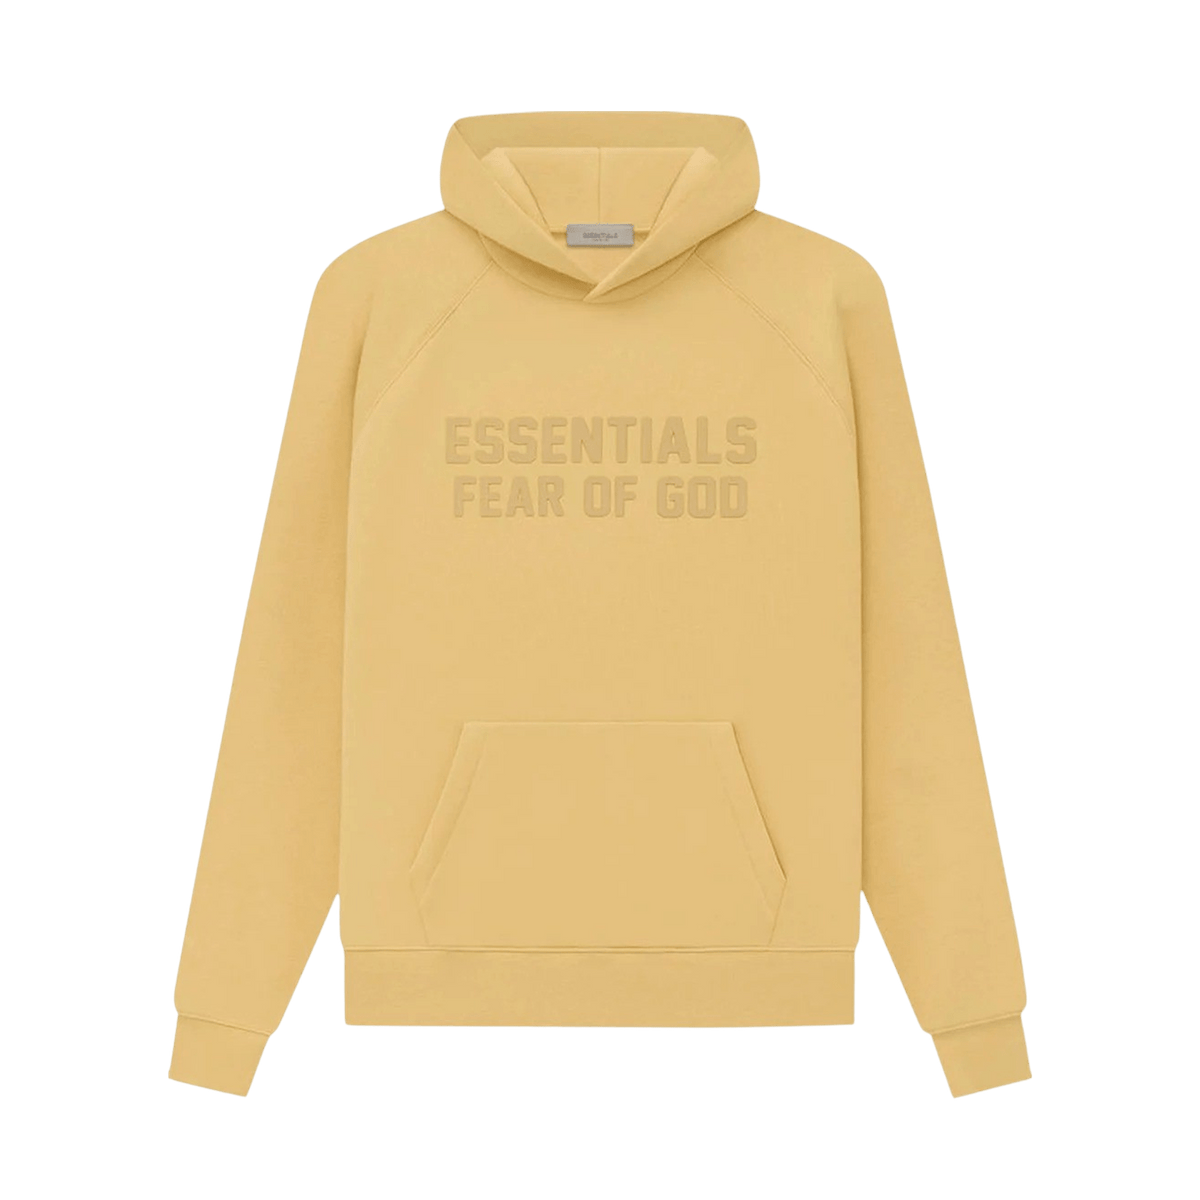 Fear of God Essentials Hoodie 'Light Tuscan' - Kick Game